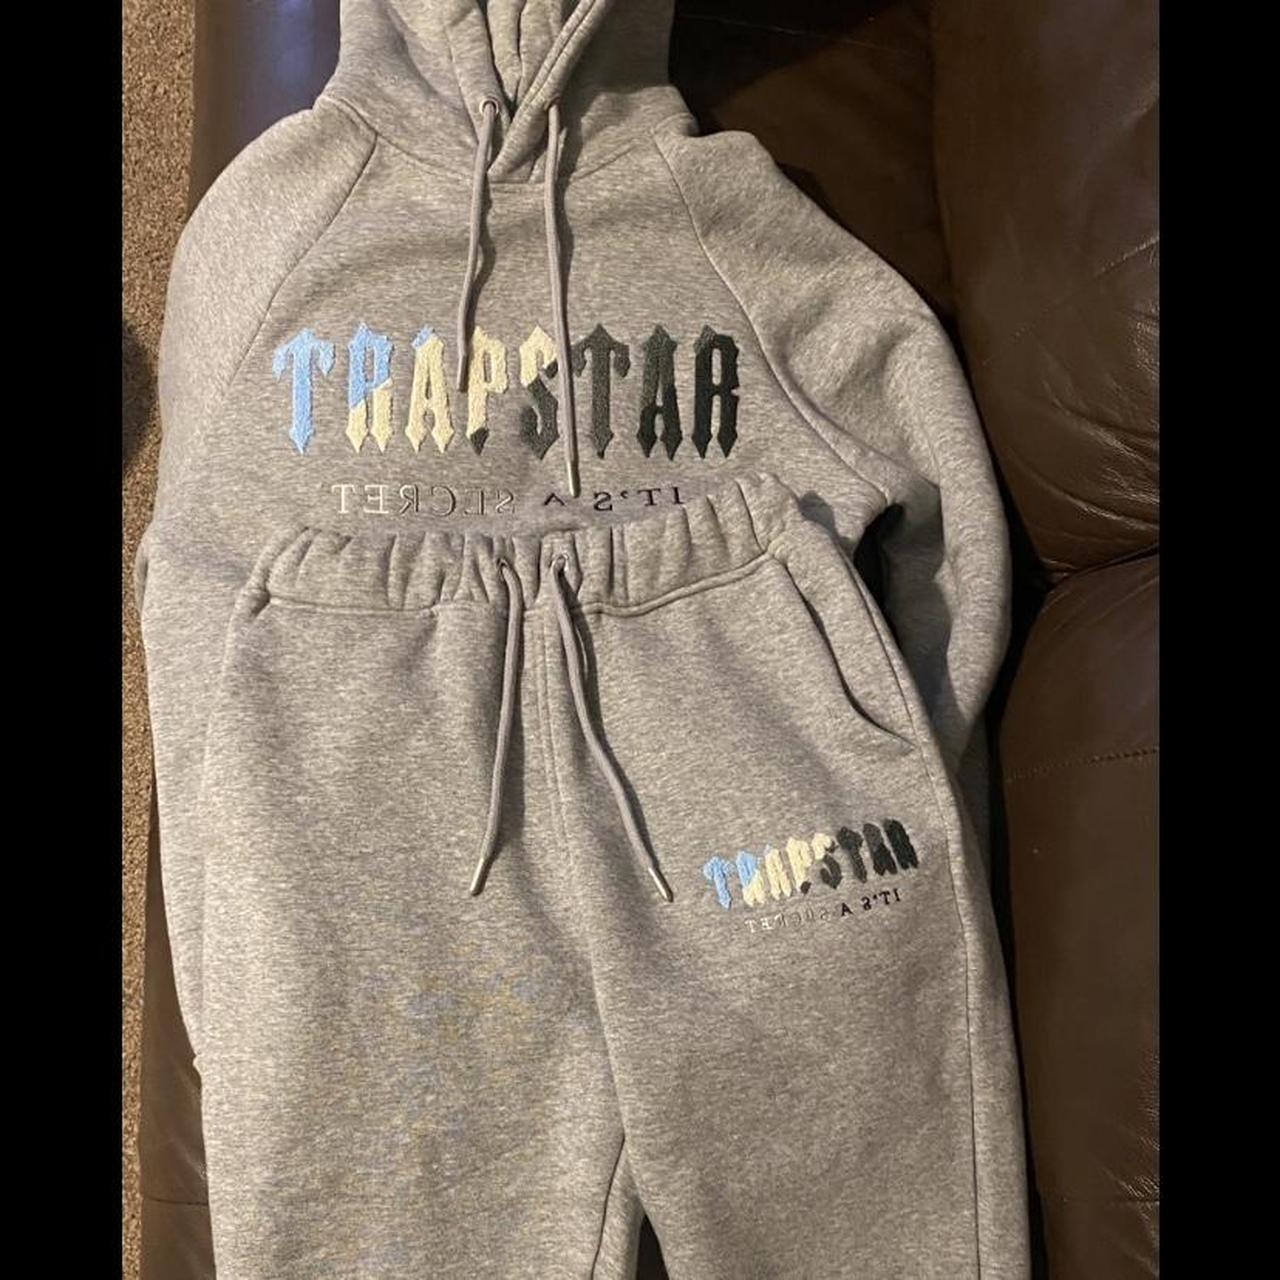 Trapstar Chenille Decoded Tracksuit ... - Depop